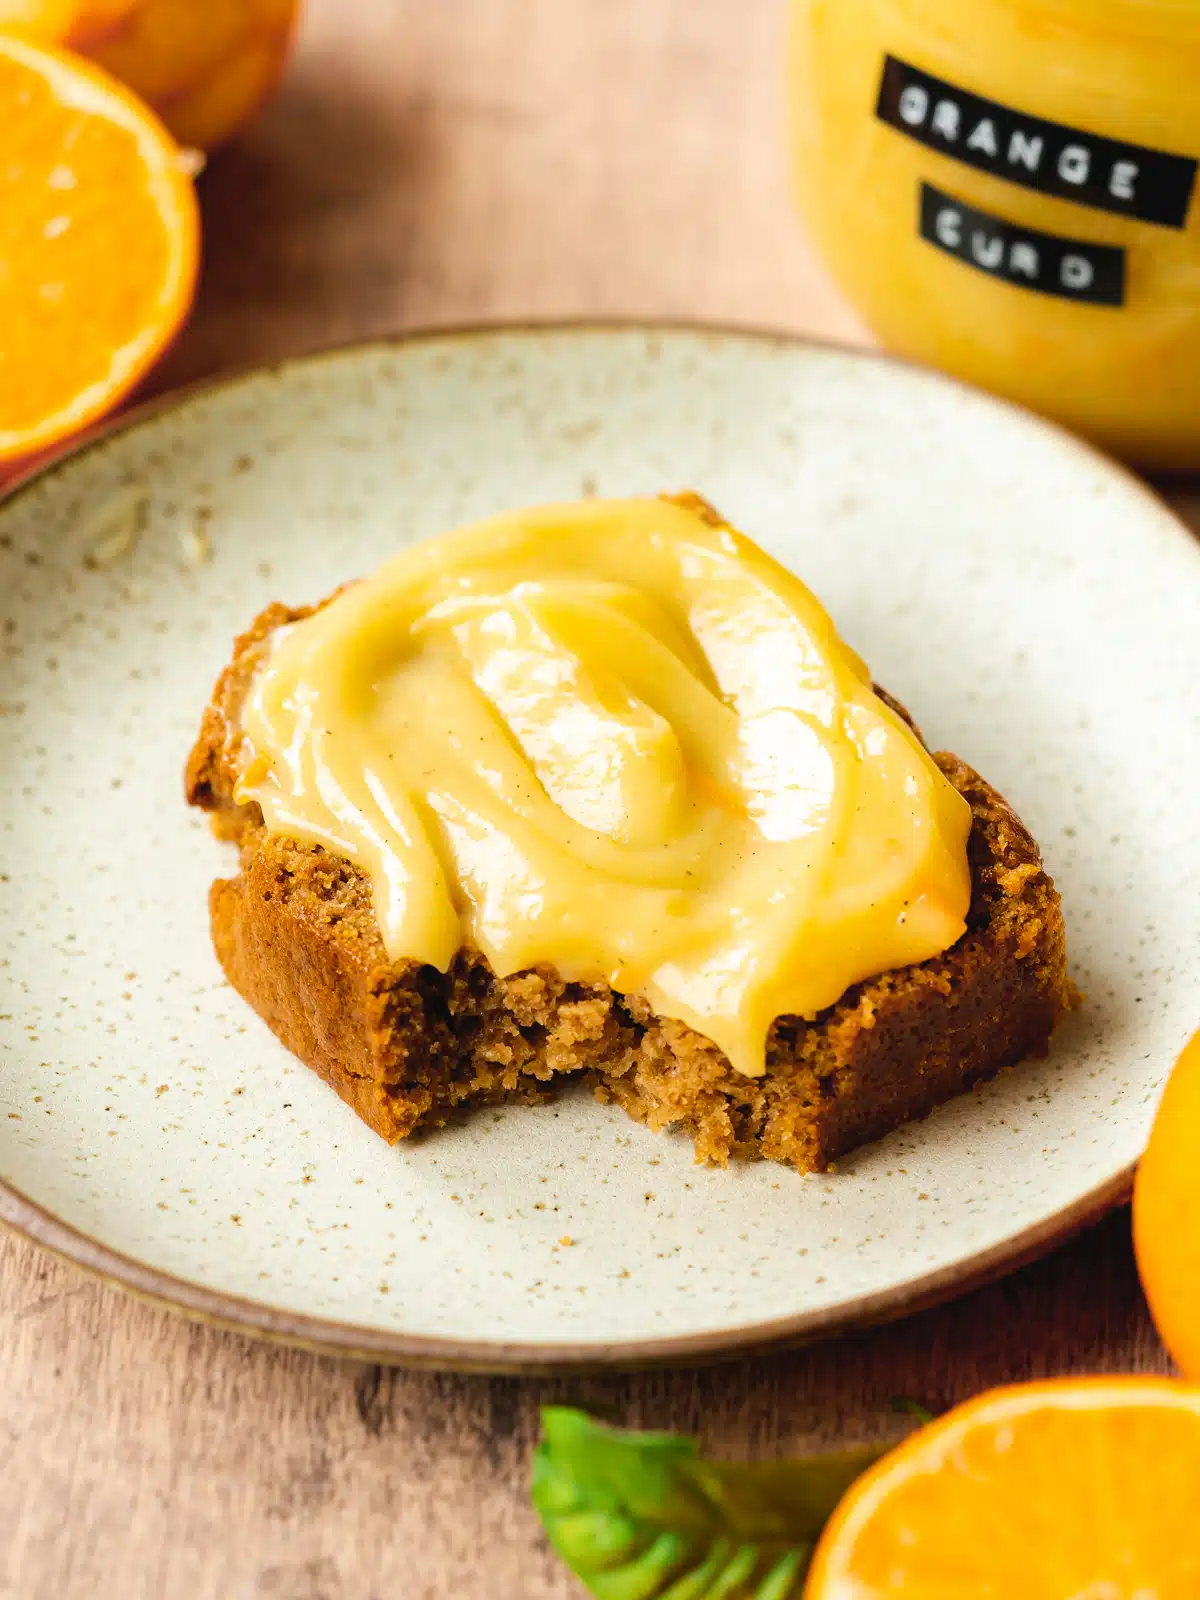 a slice of sweet bread with a thick layer of orange curd and a bite taken from it.